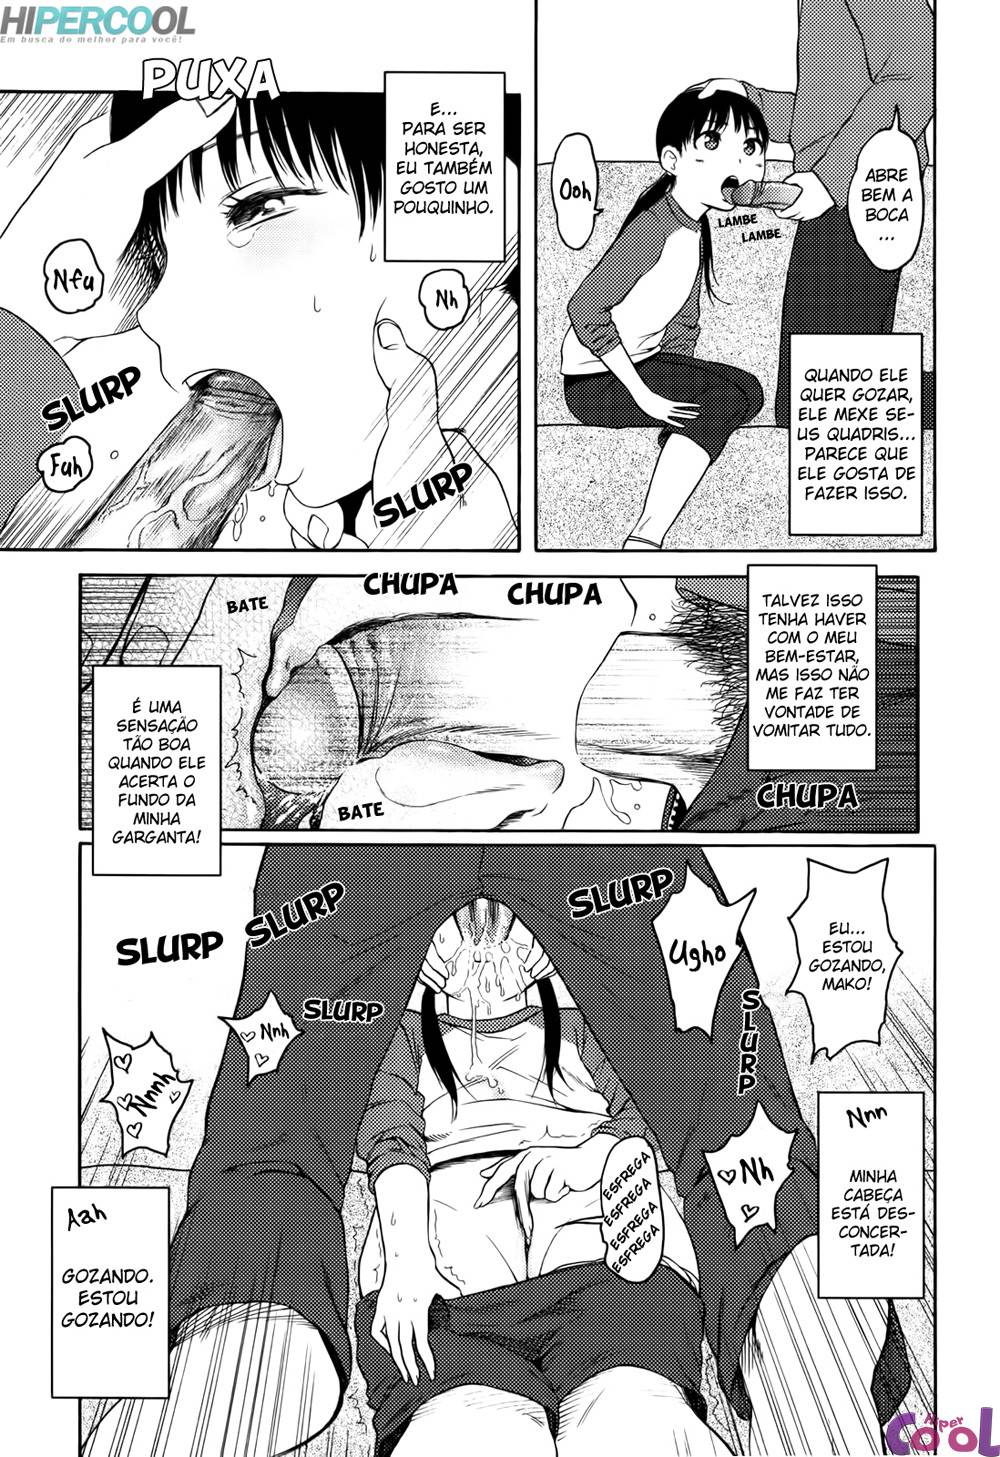 stand-by-me-chapter-03-page-07.jpg